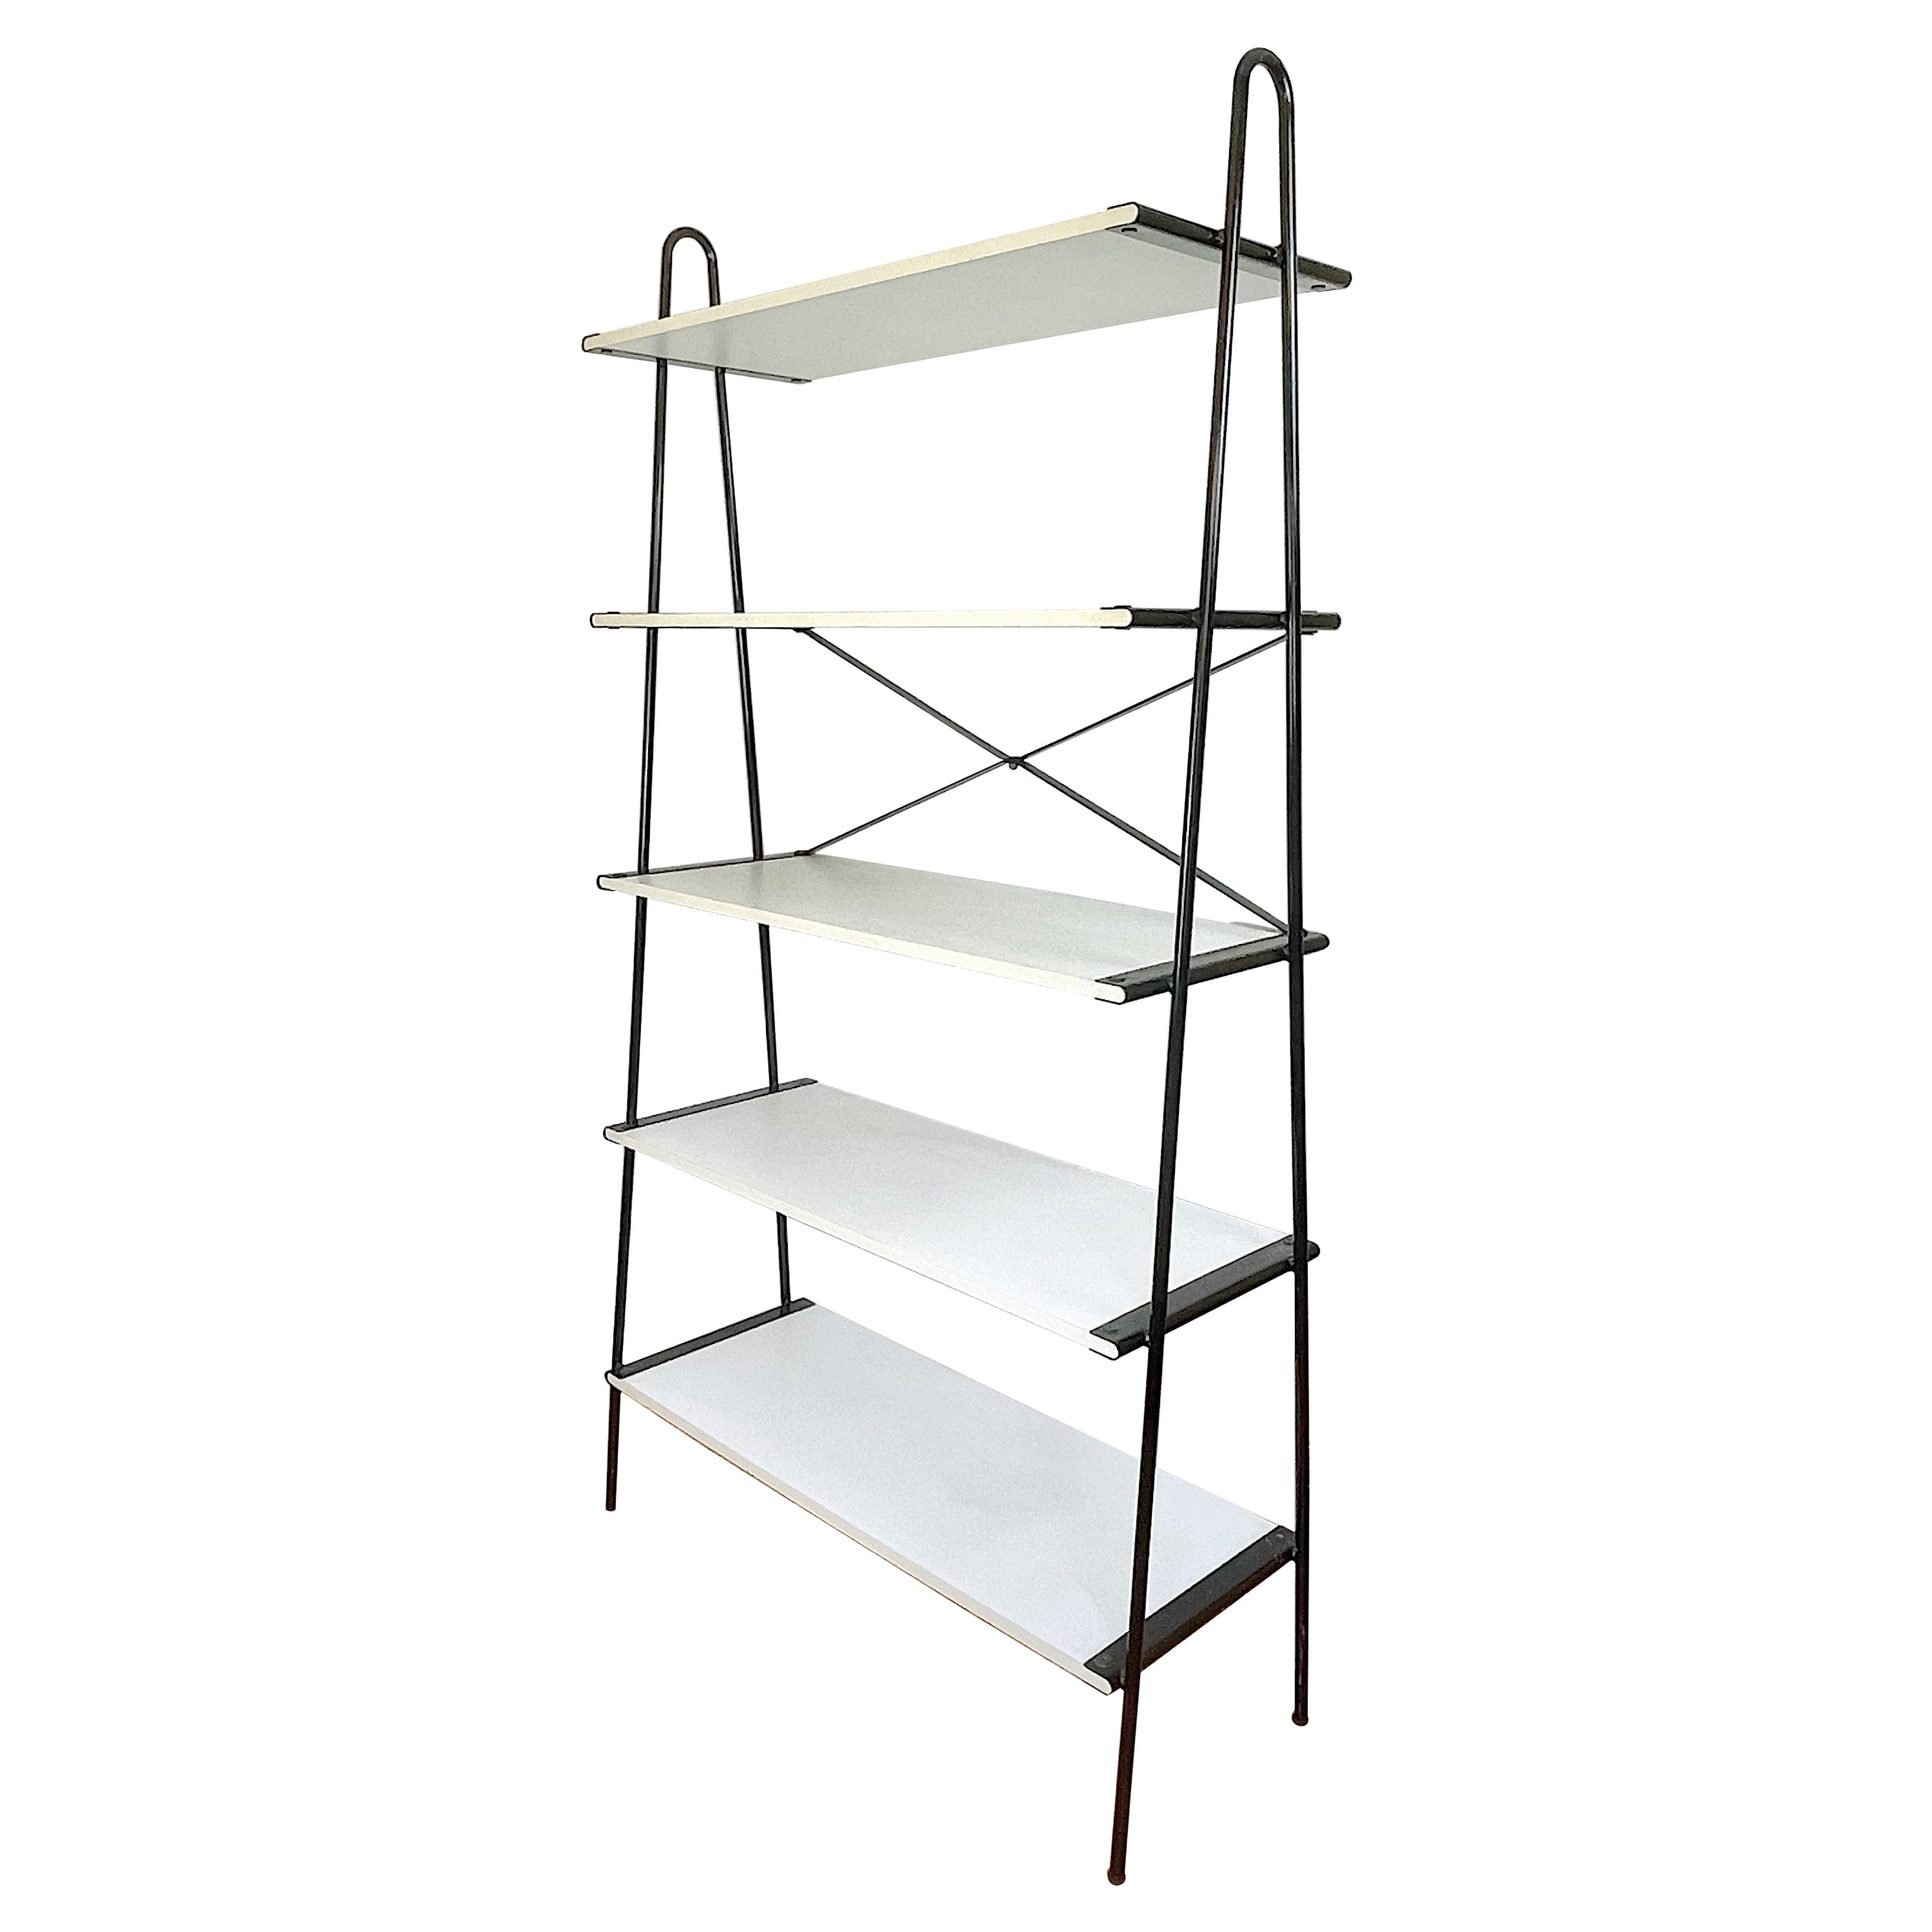 Italian Post-Modern Architectural Bookcase, Ladder Shelving Unit Etagere For Sale